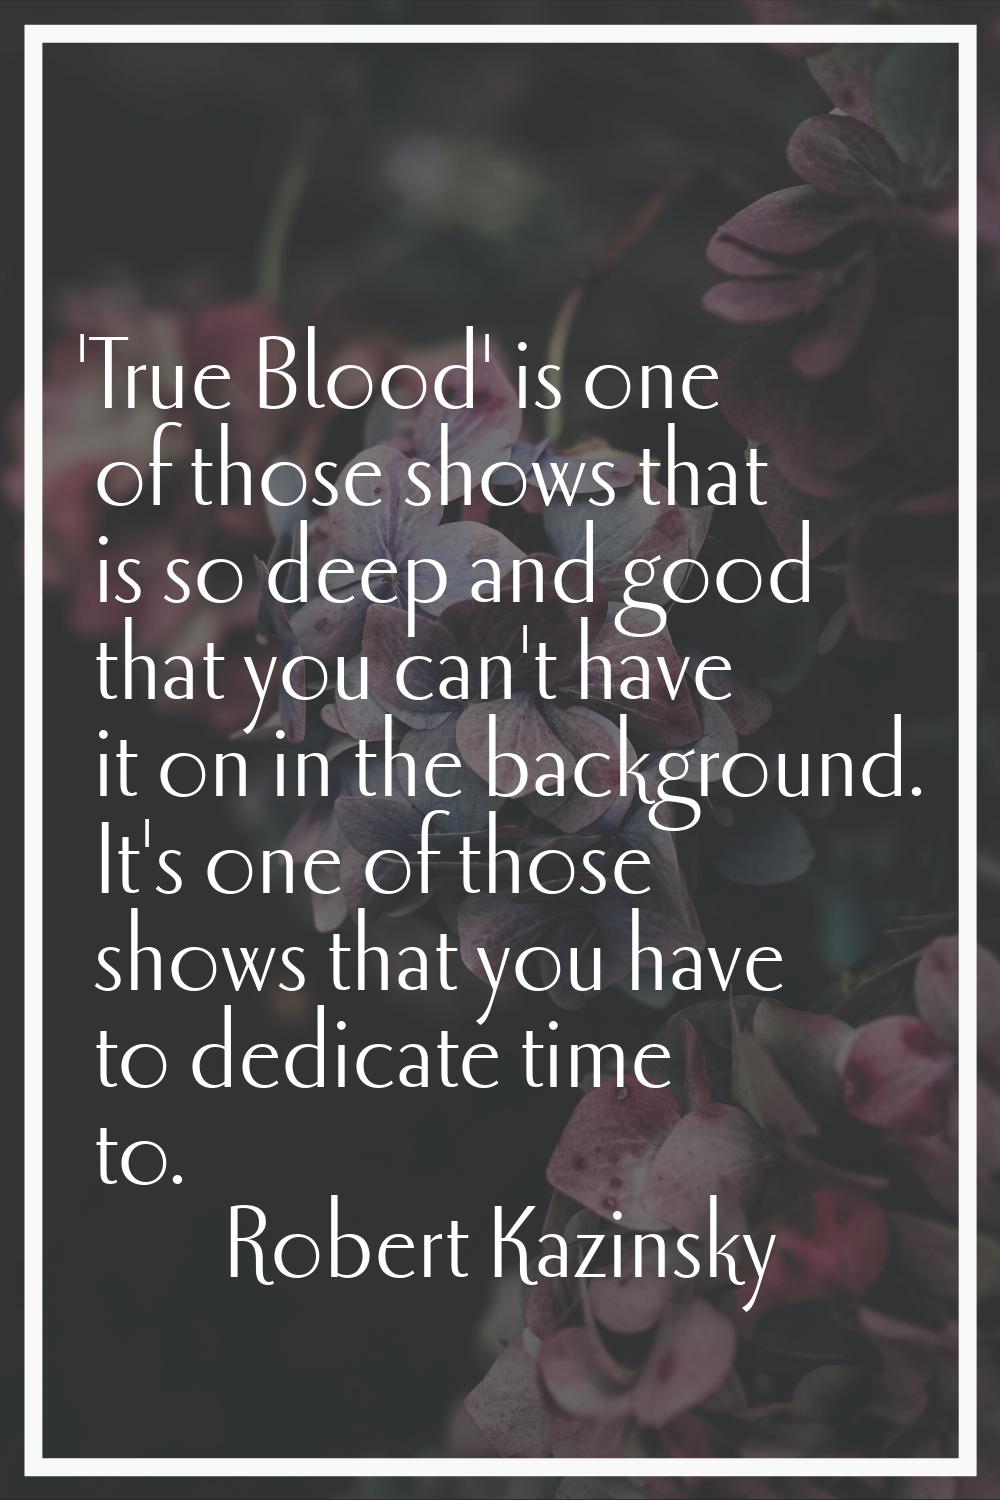 'True Blood' is one of those shows that is so deep and good that you can't have it on in the backgr